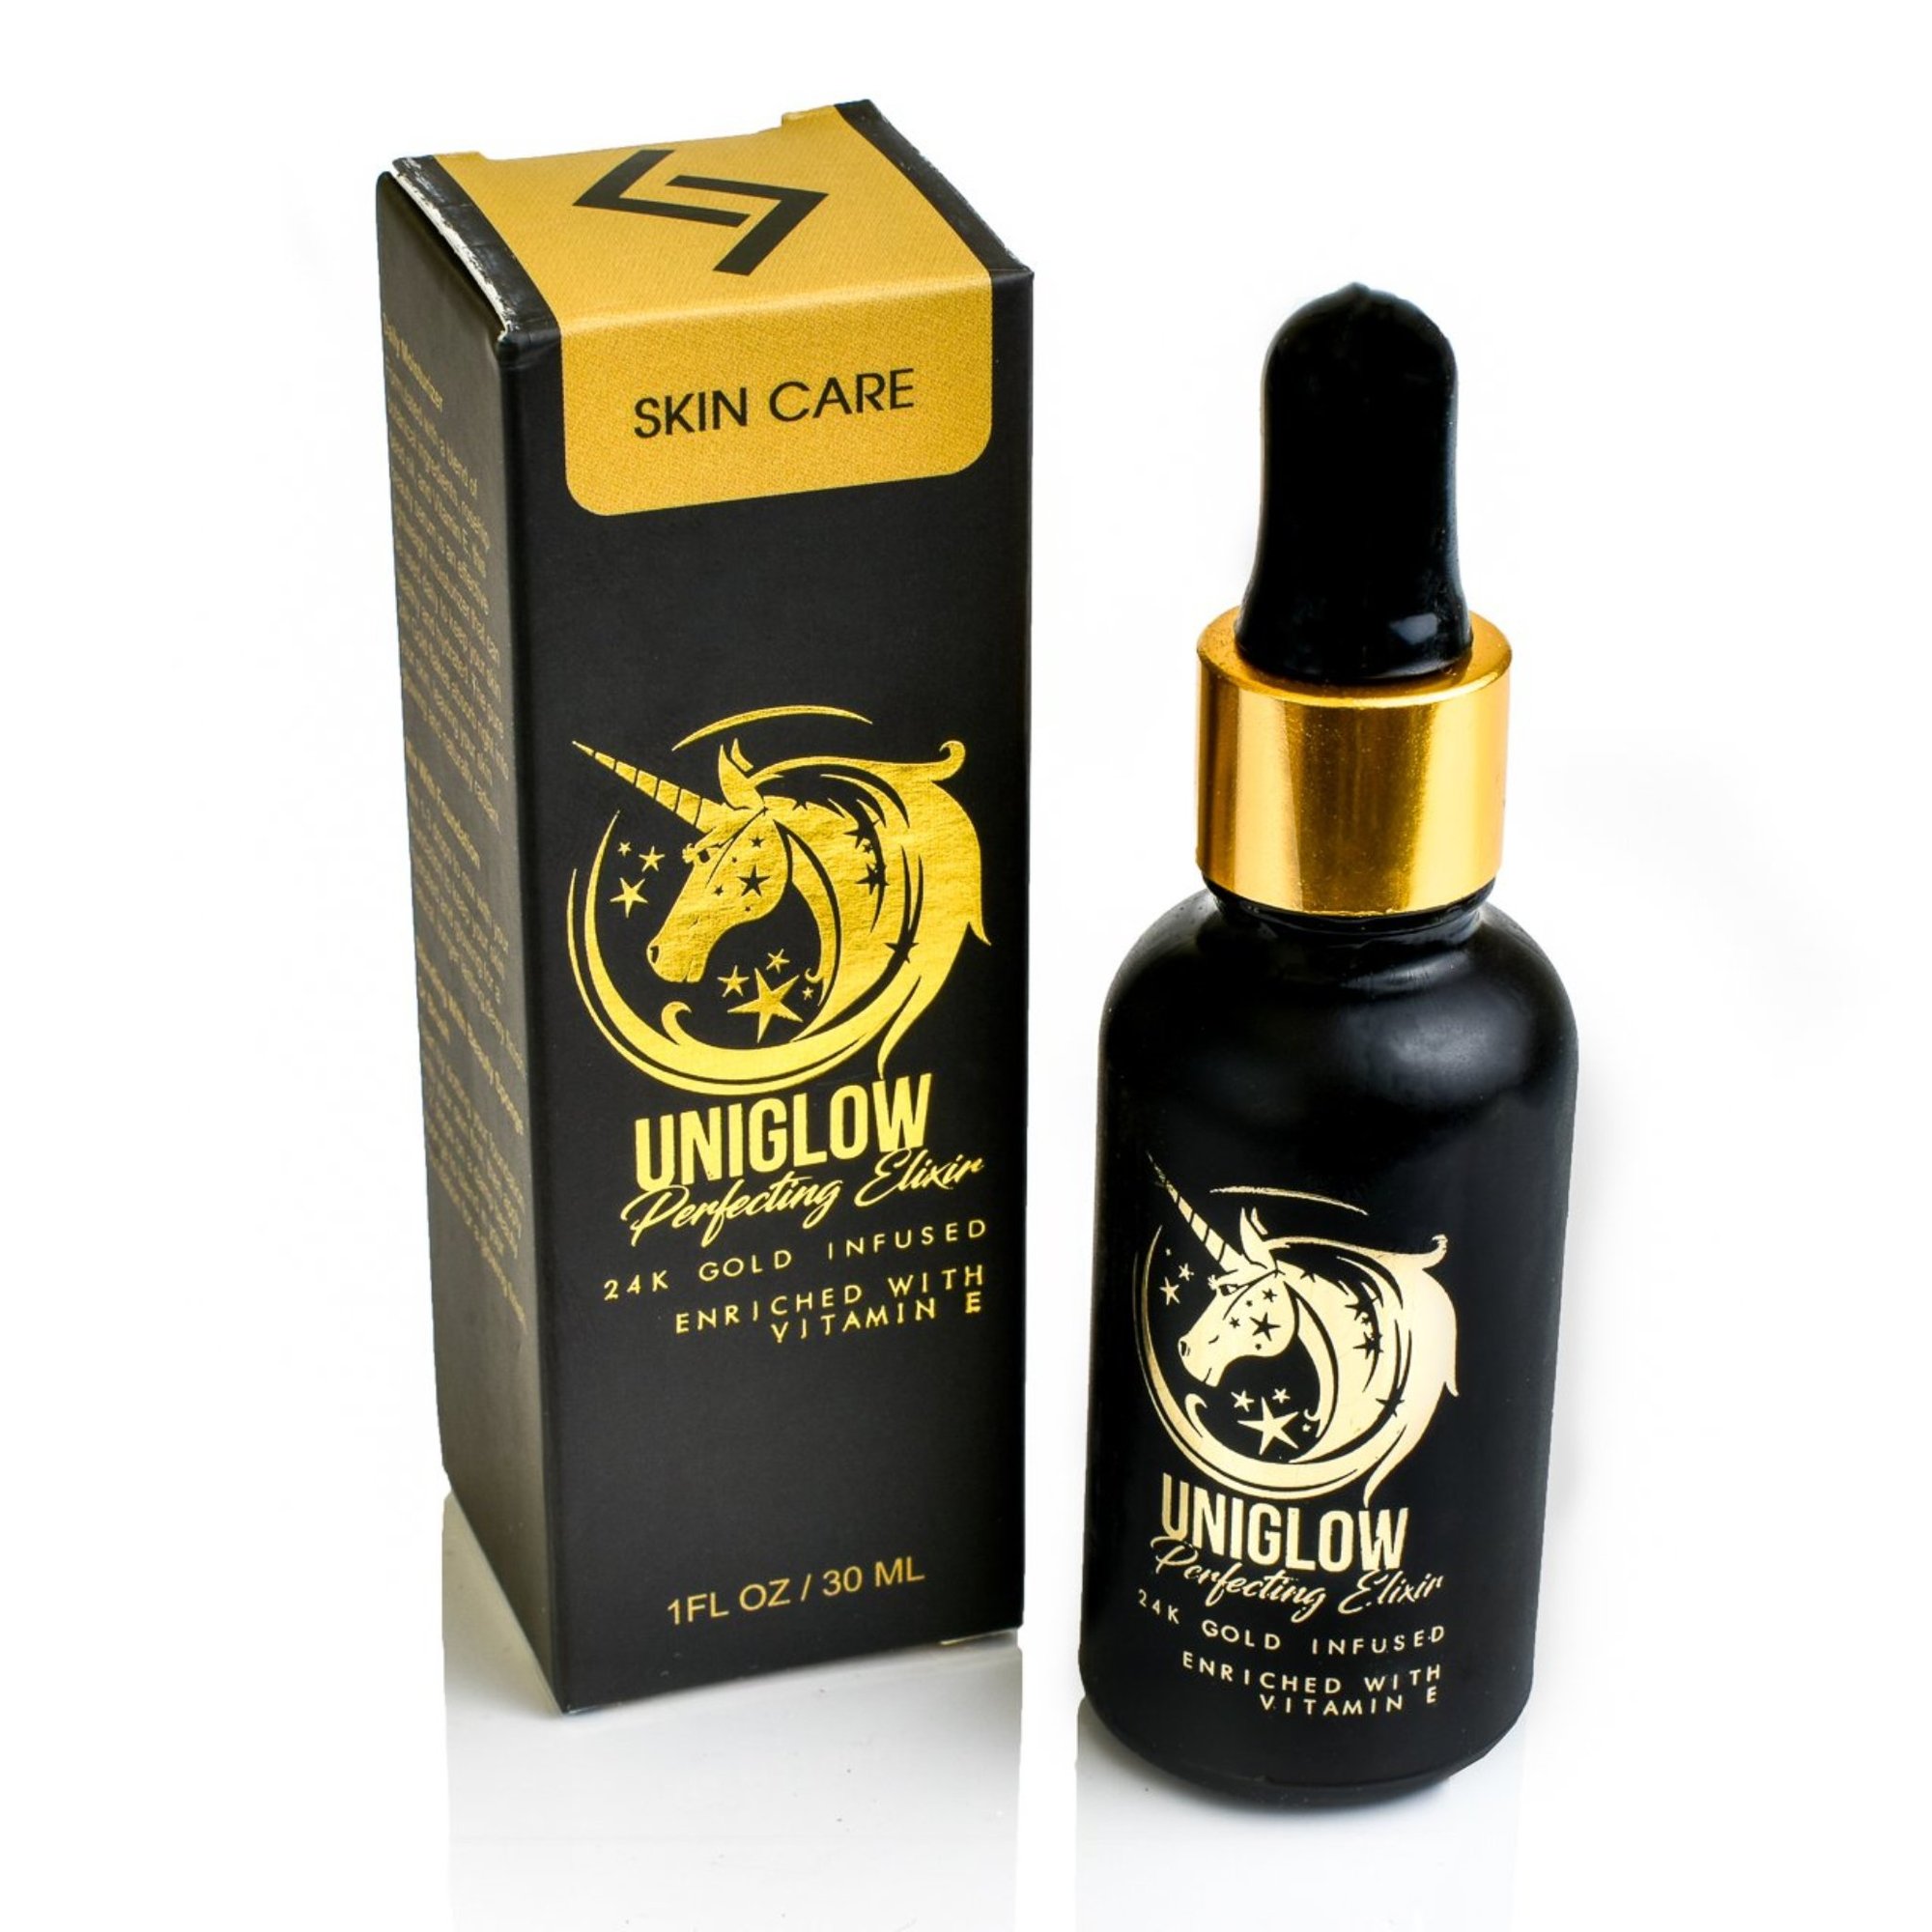 Revolutionary facial oil meets gold standard for glowing, hydrated skin